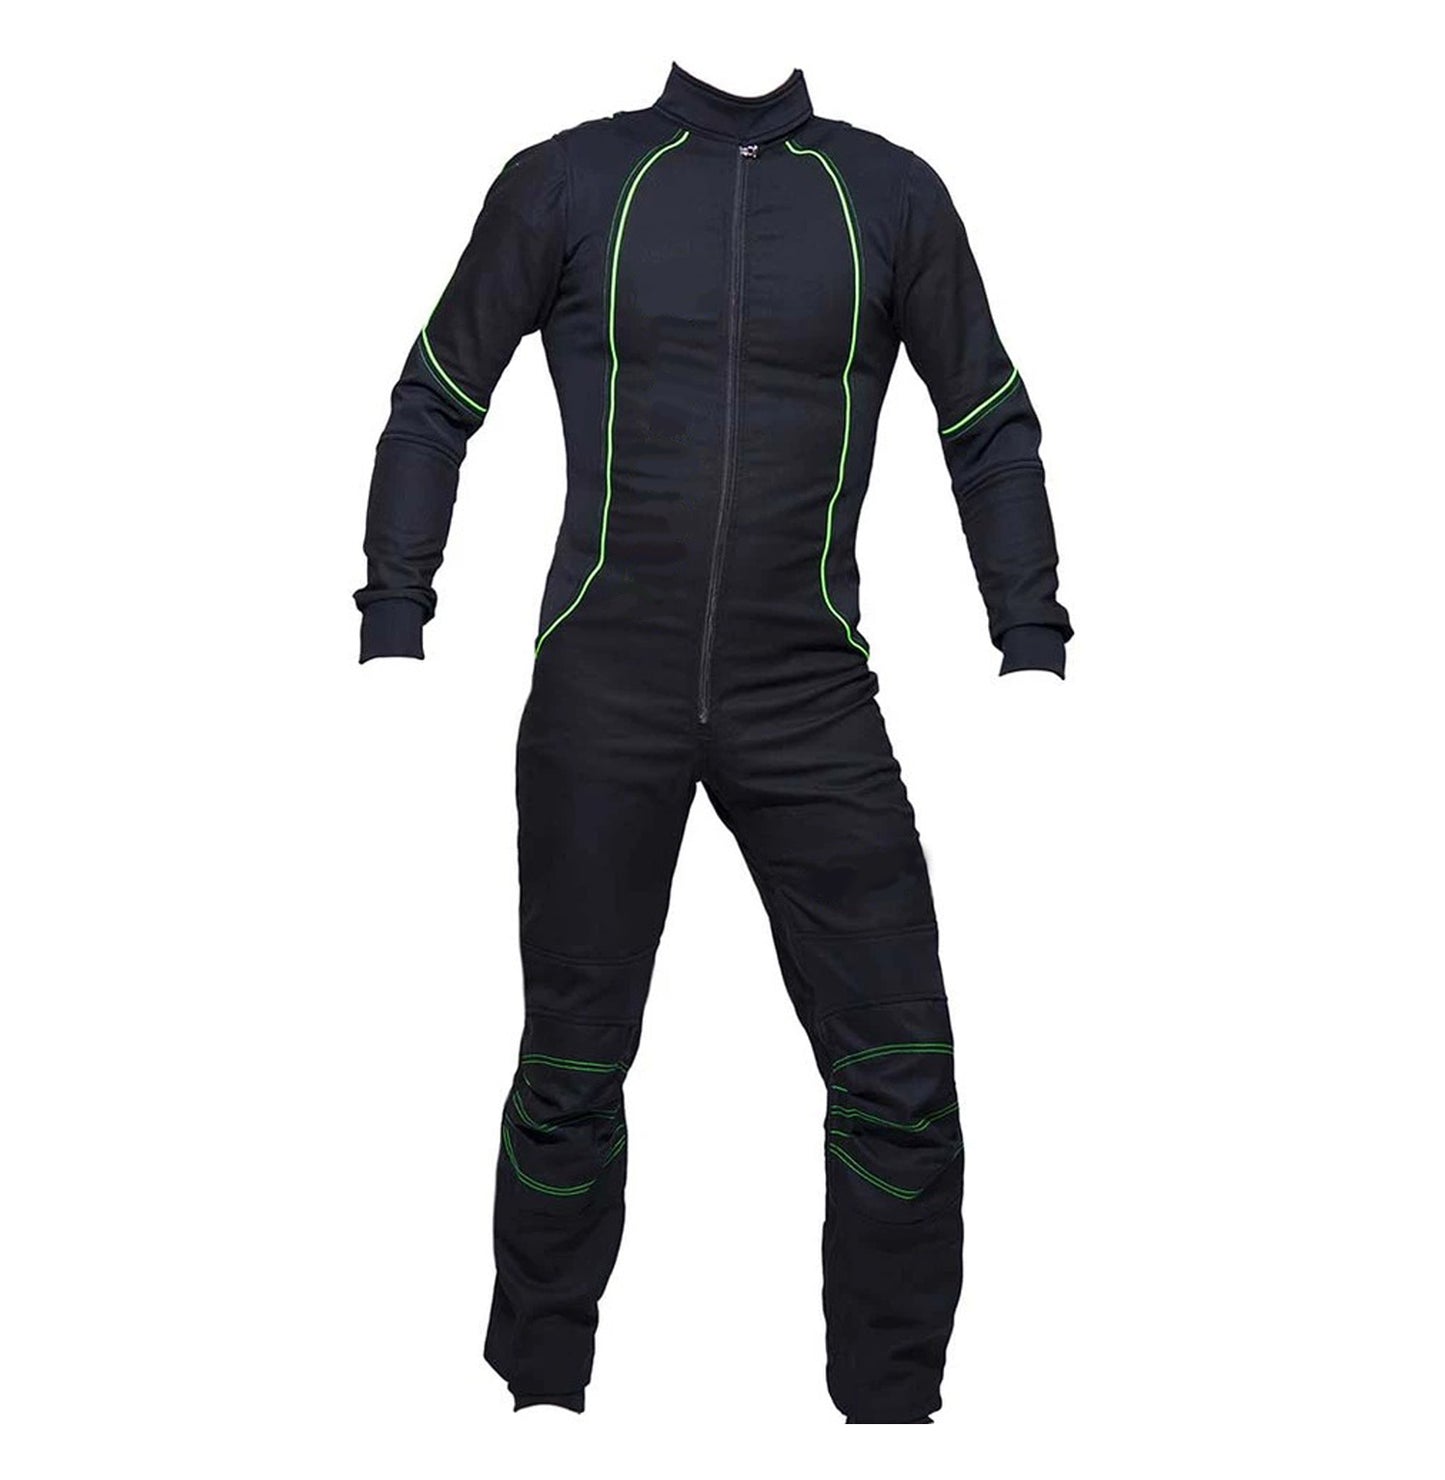 Freefly Skydiving Suit in Black And Green Color